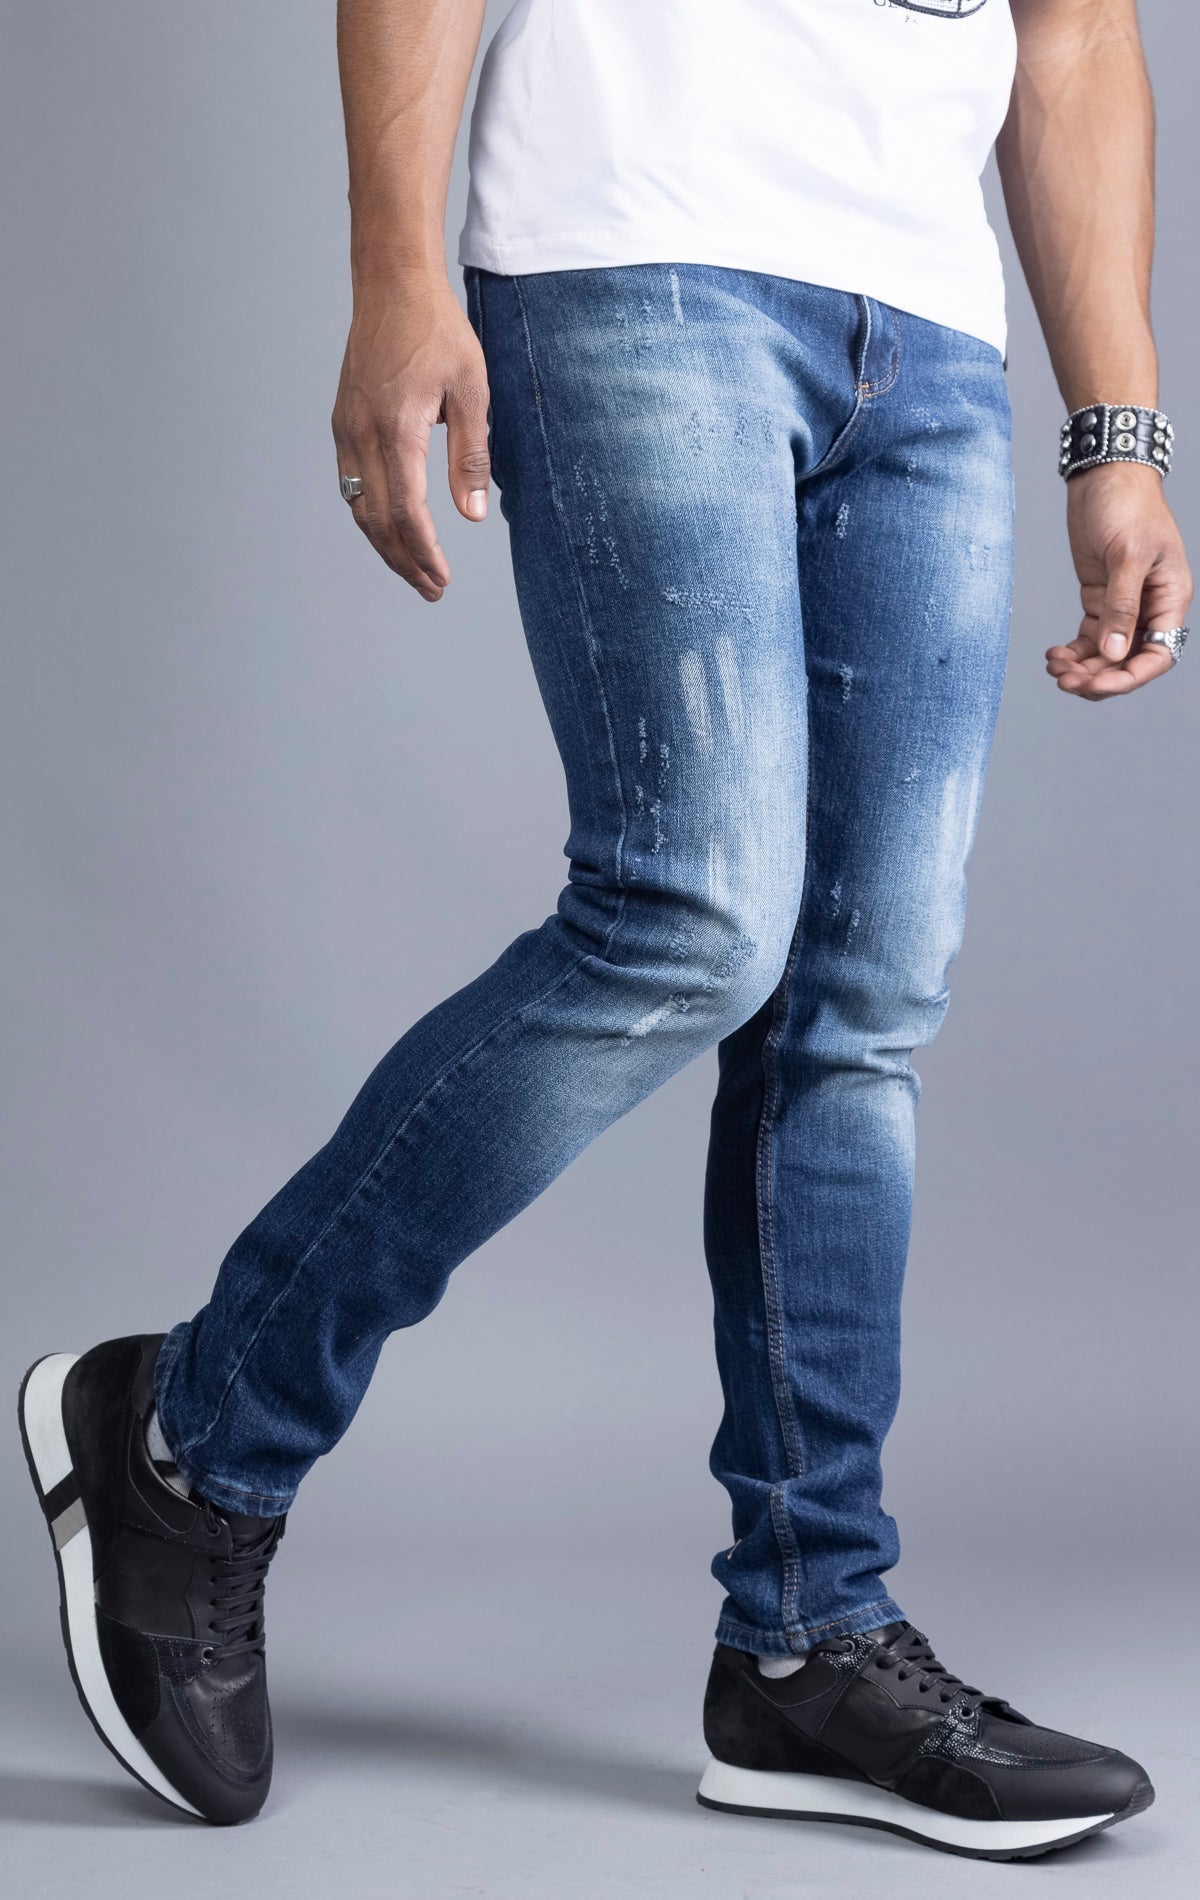 Blue slim-fit jeans with a narrow leg opening and five pockets.